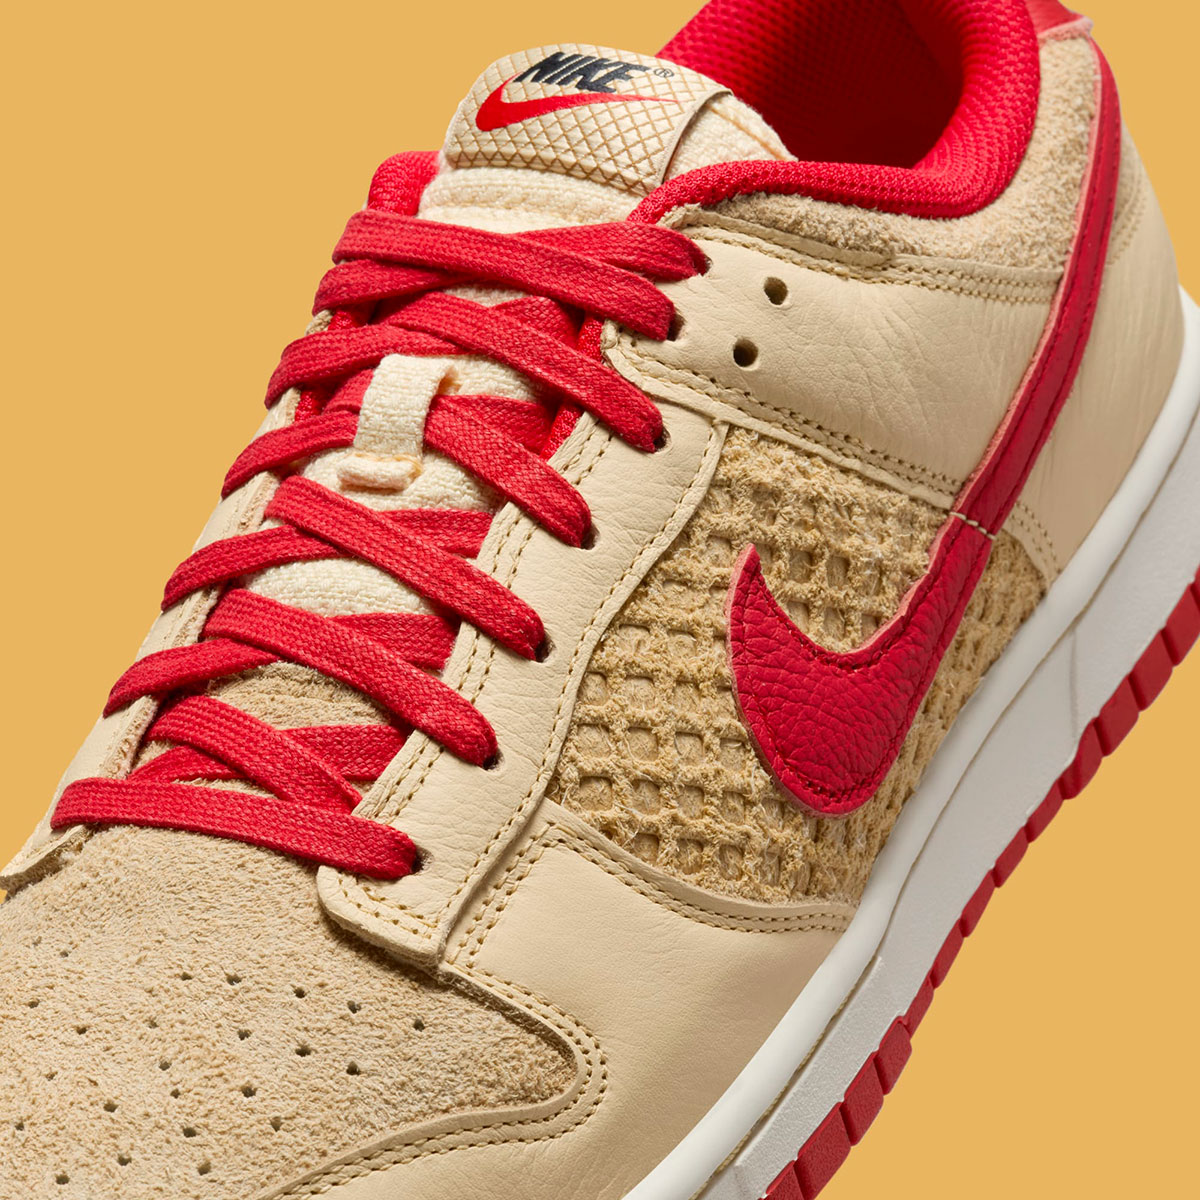 Where To Buy The nike what Dunk Low Barber & Resale Value Waffle Strawberry Hj9100 294 1